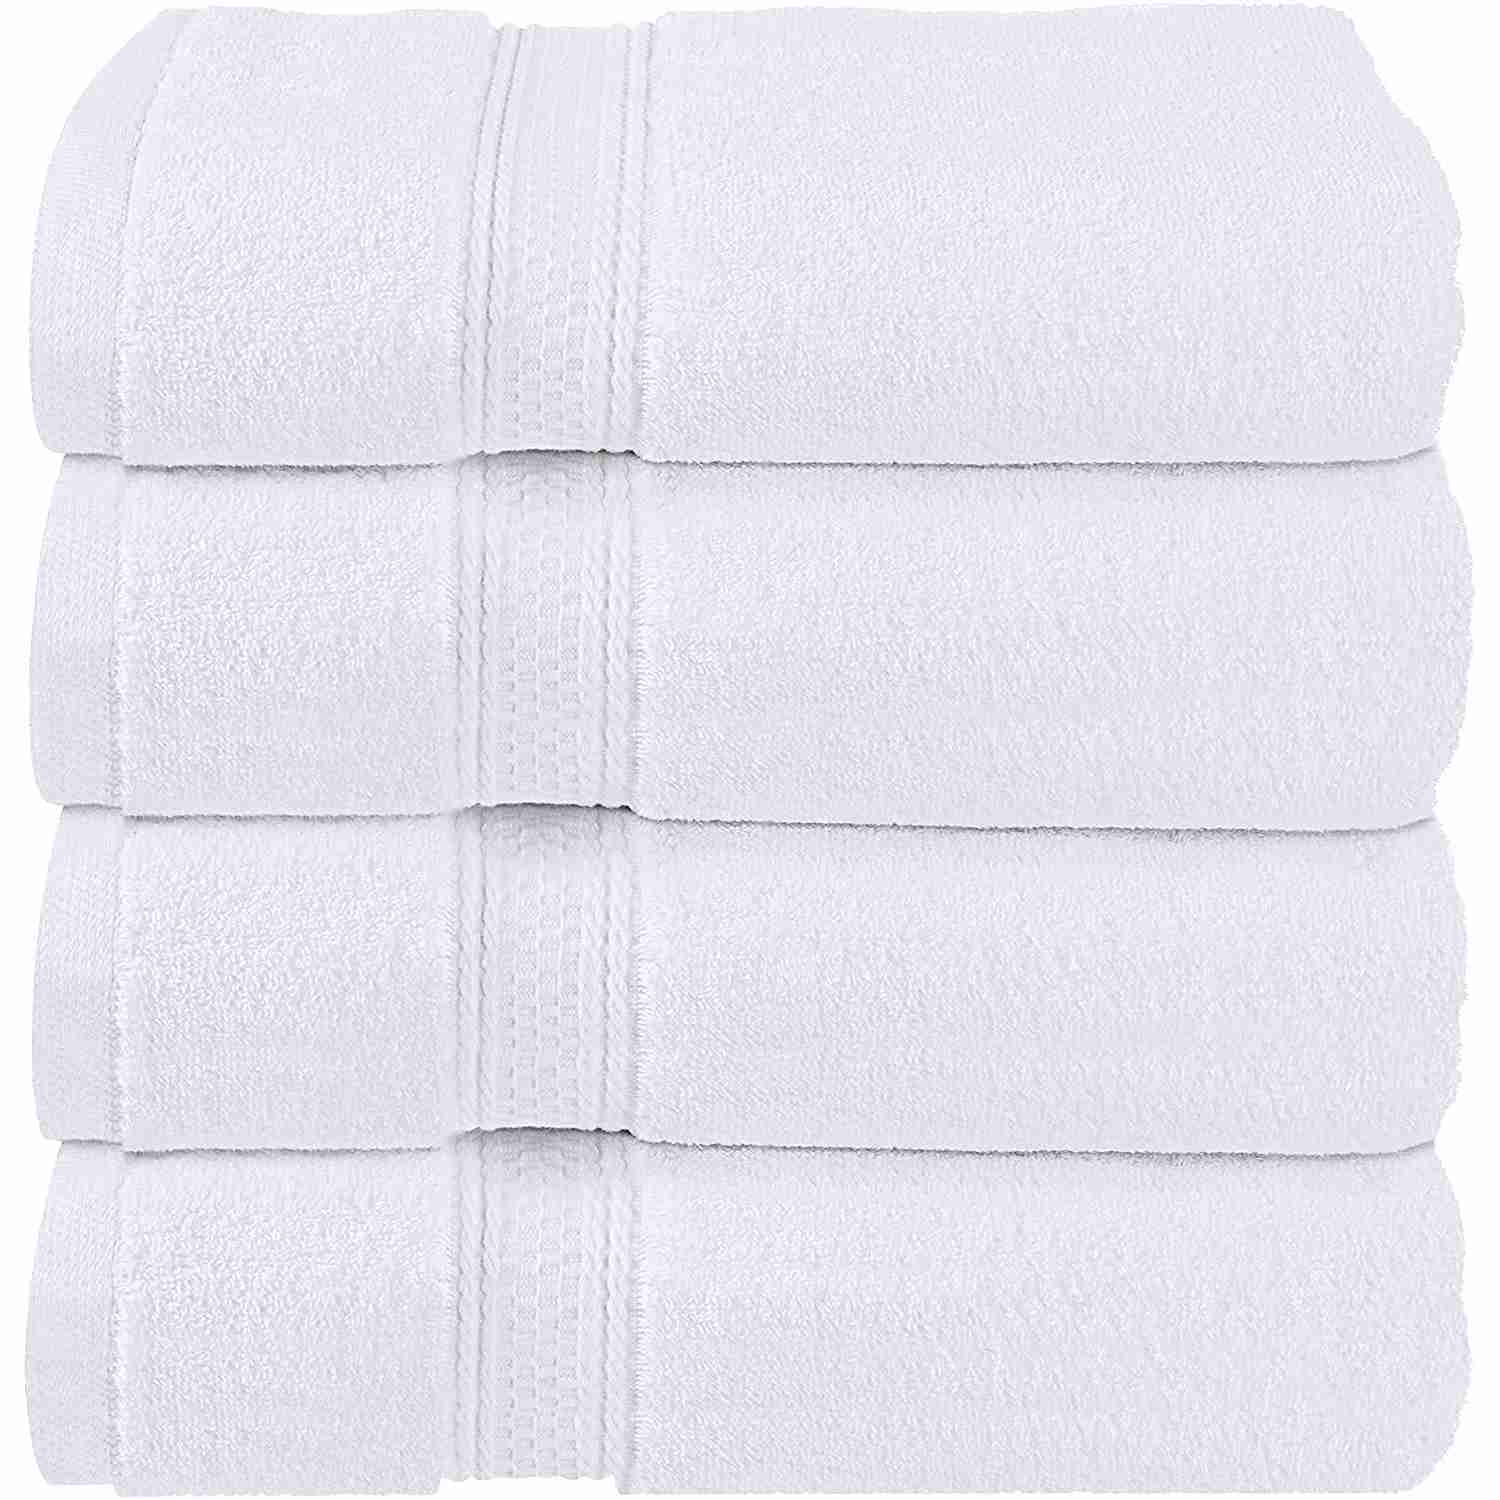 hand-towels with cash back rebate